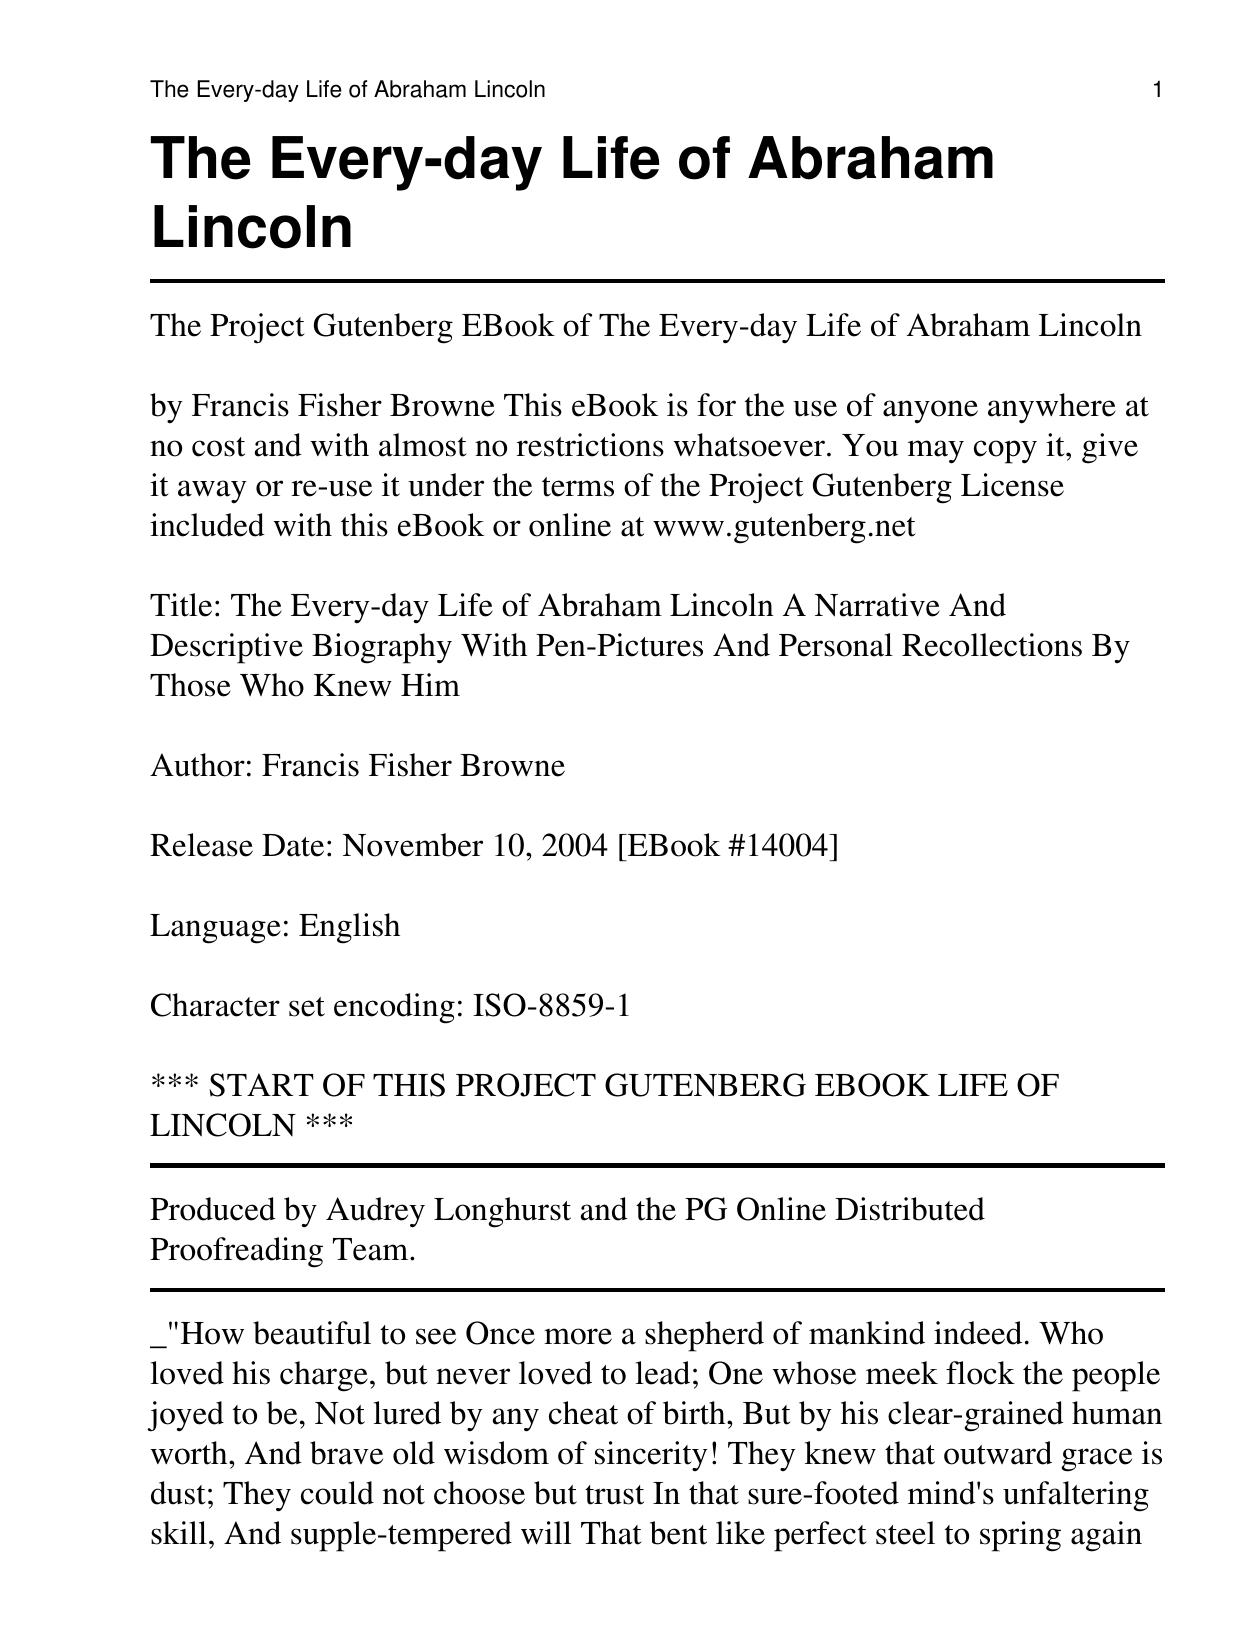 The Every-day Life Of Abraham Lincoln